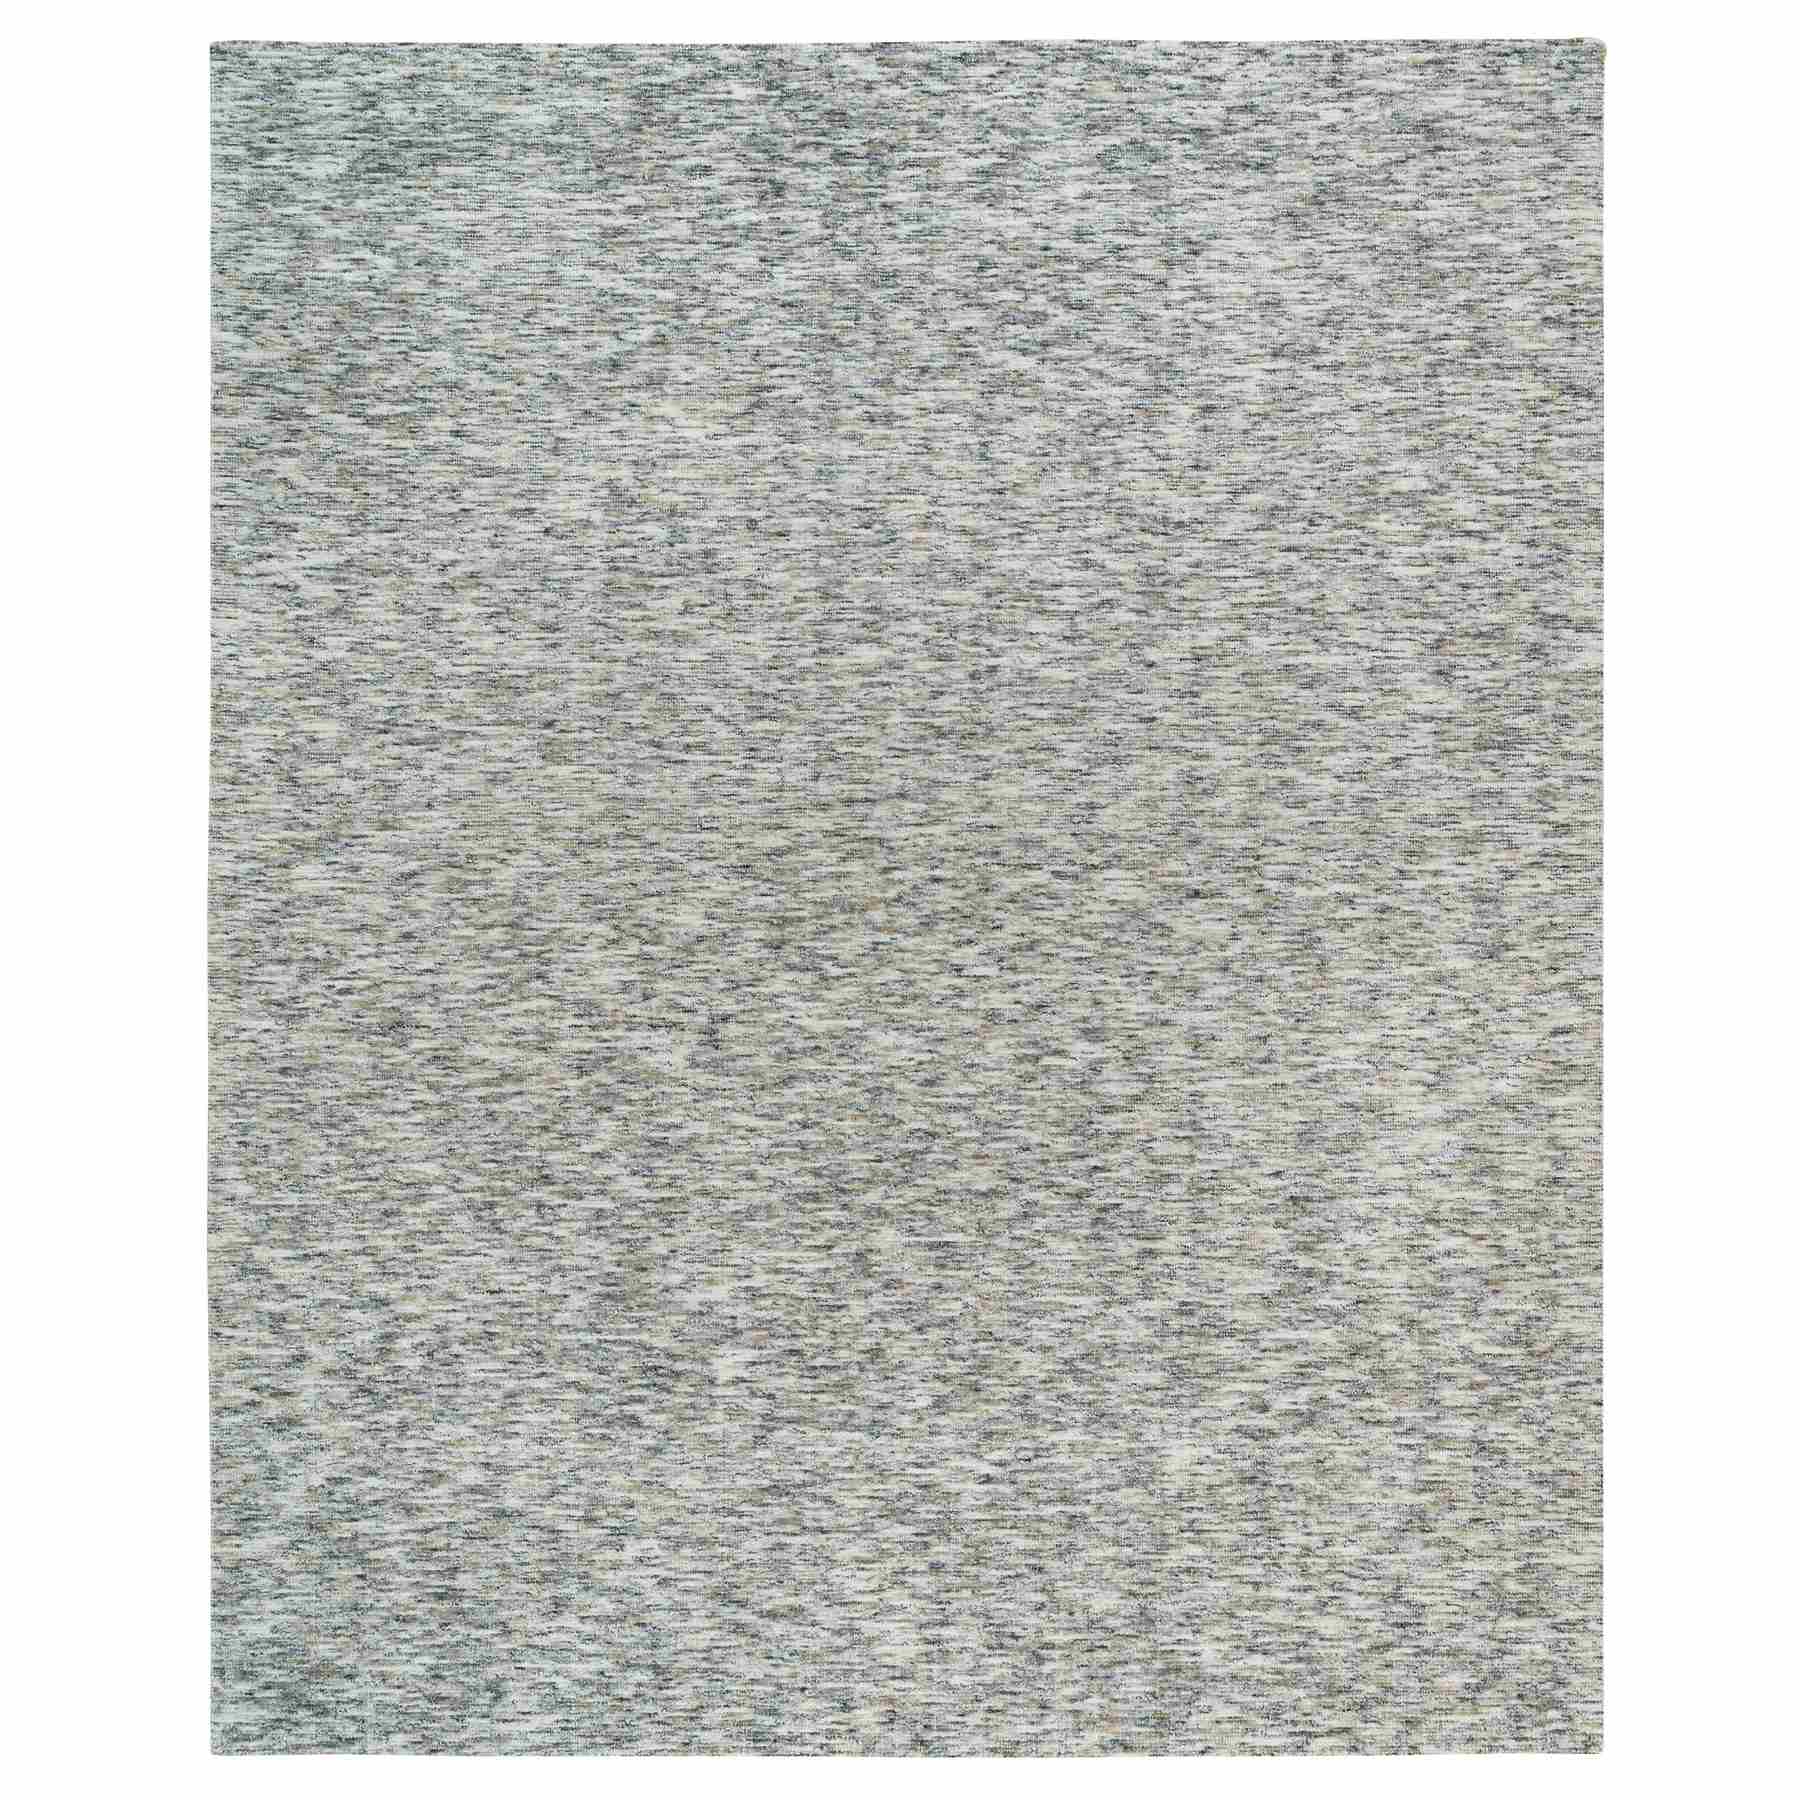 Earth Tone Colors, Modern Striae Design, Soft to the Touch, Pure Wool, Hand Loomed, Oversized Oriental Rug